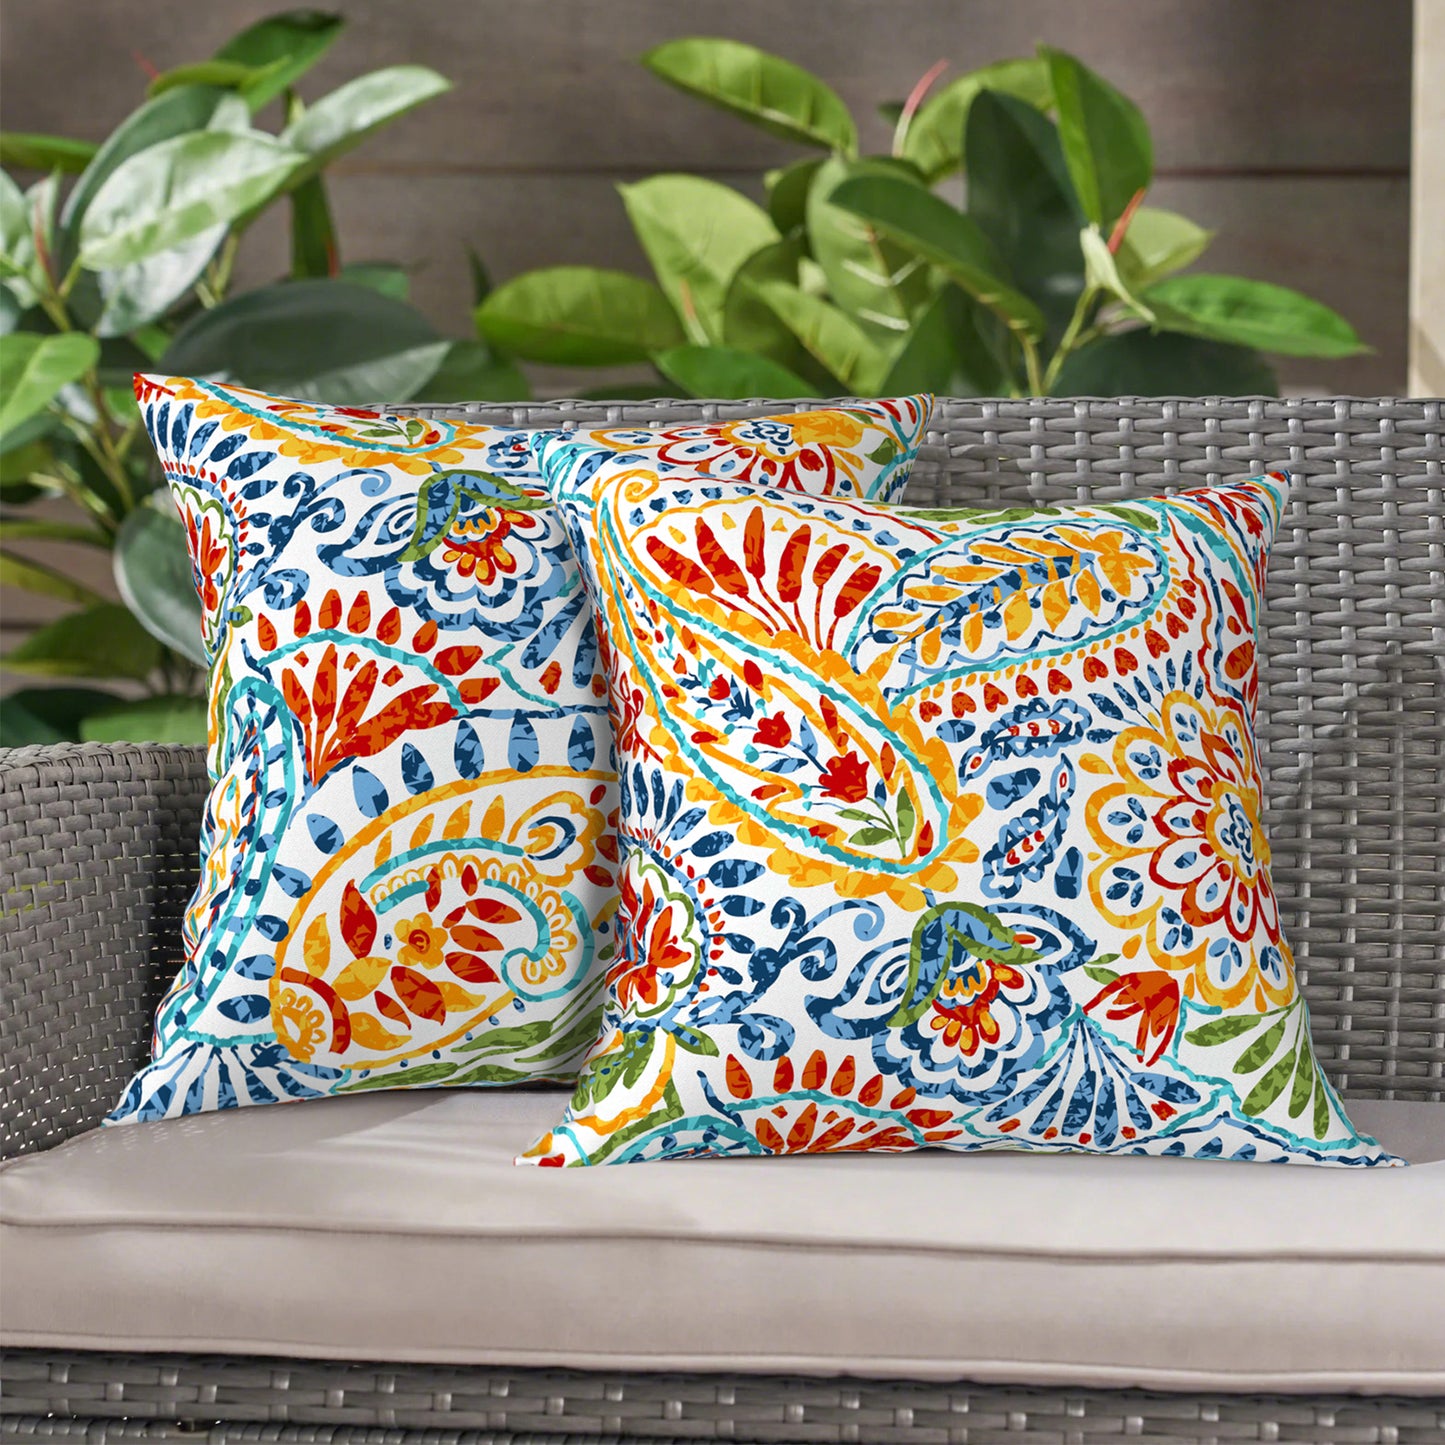 Melody Elephant Outdoor Throw Pillow Covers Pack of 2, Decorative Water Repellent Square Pillow Cases 18x18 Inch, Patio Pillowcases for Home Patio Furniture Use, Paisley Multi